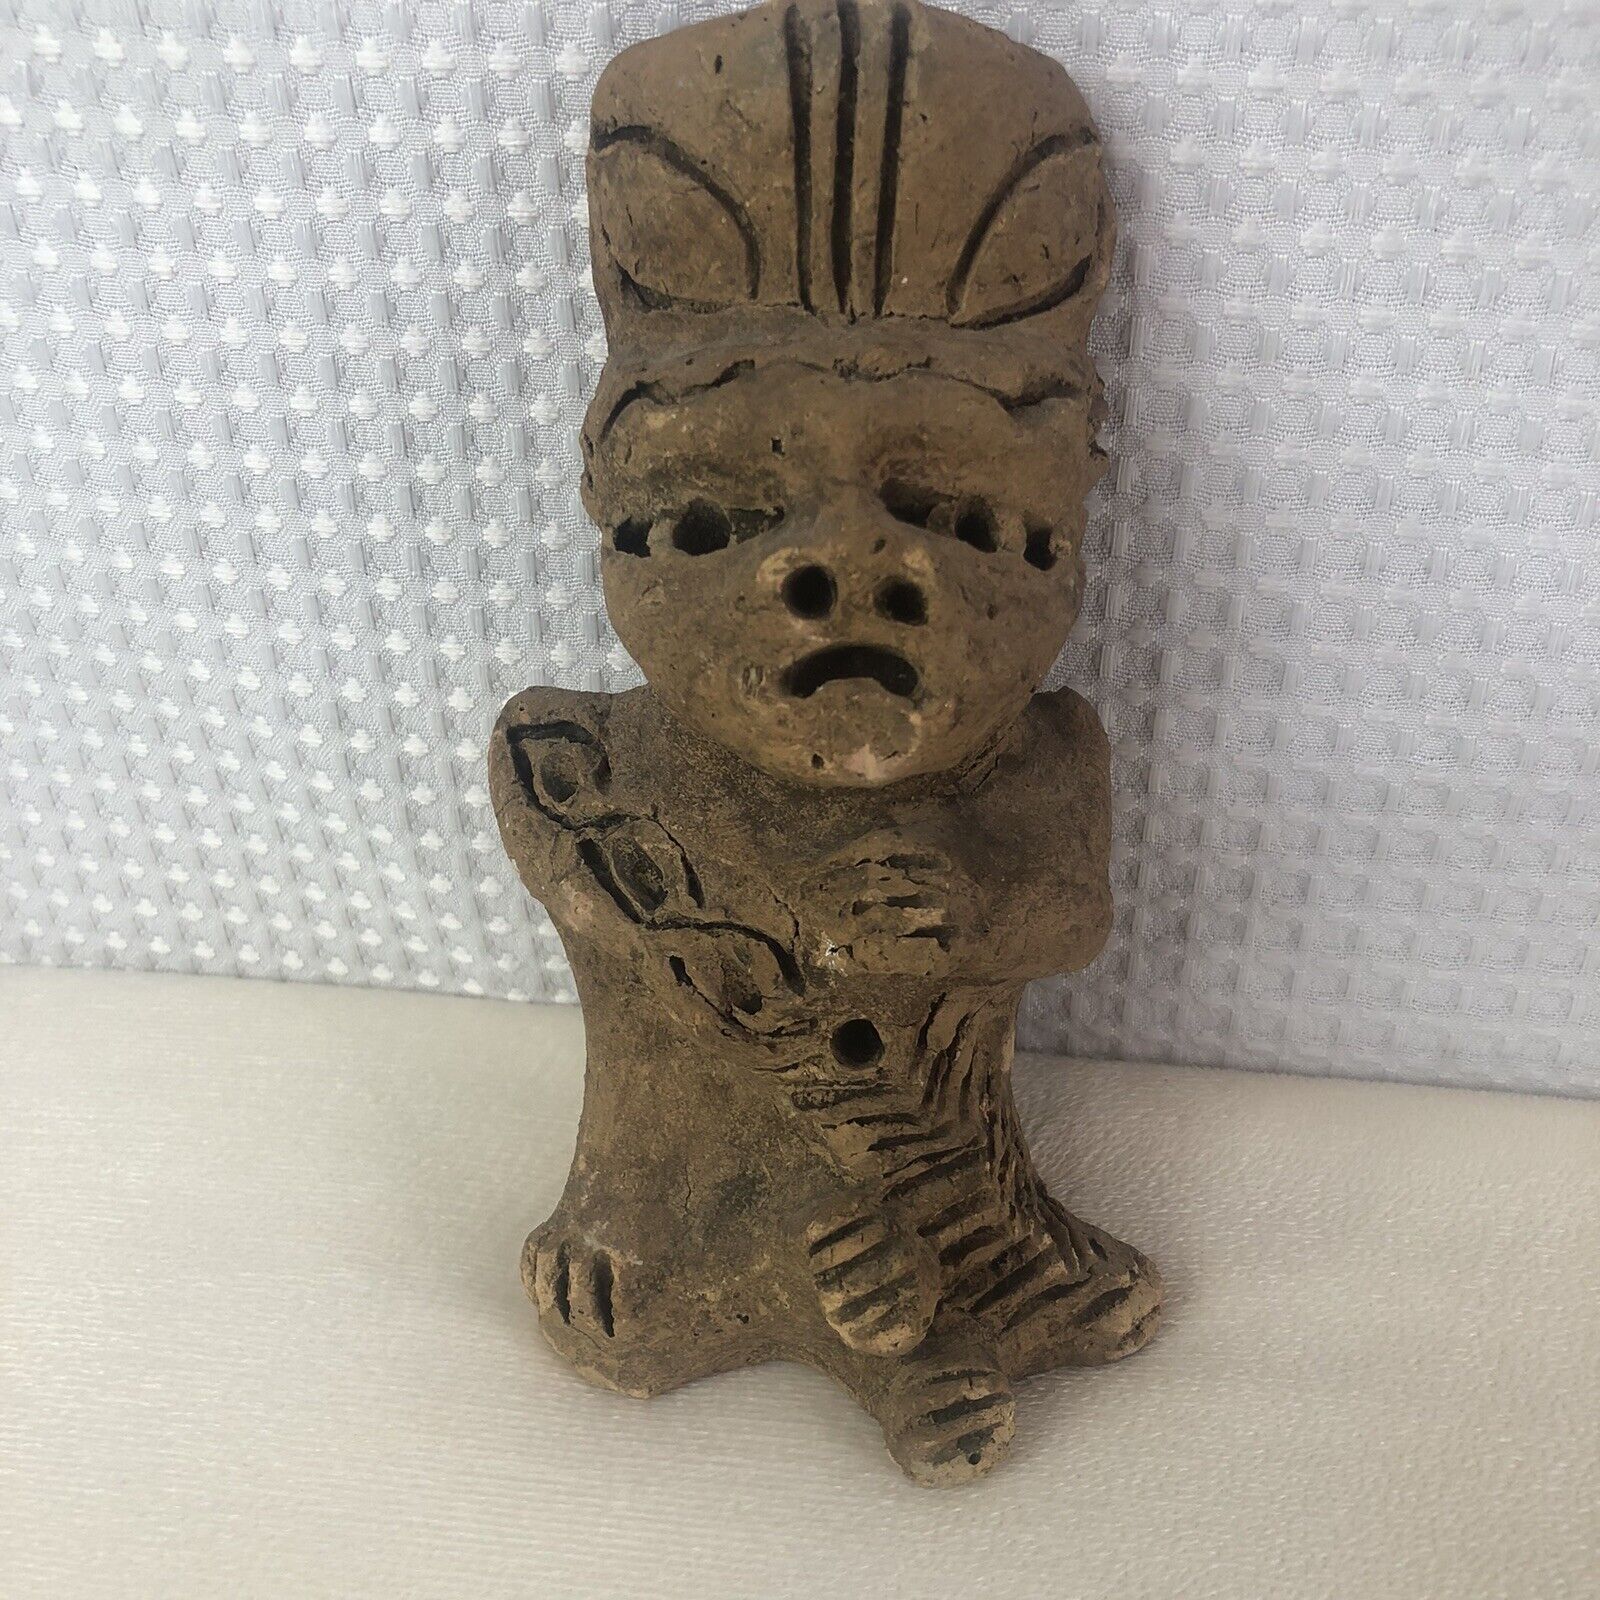 Vintage Collectible Tribal Art Mexican Columbian Statue Figurine Aztec/Mexican